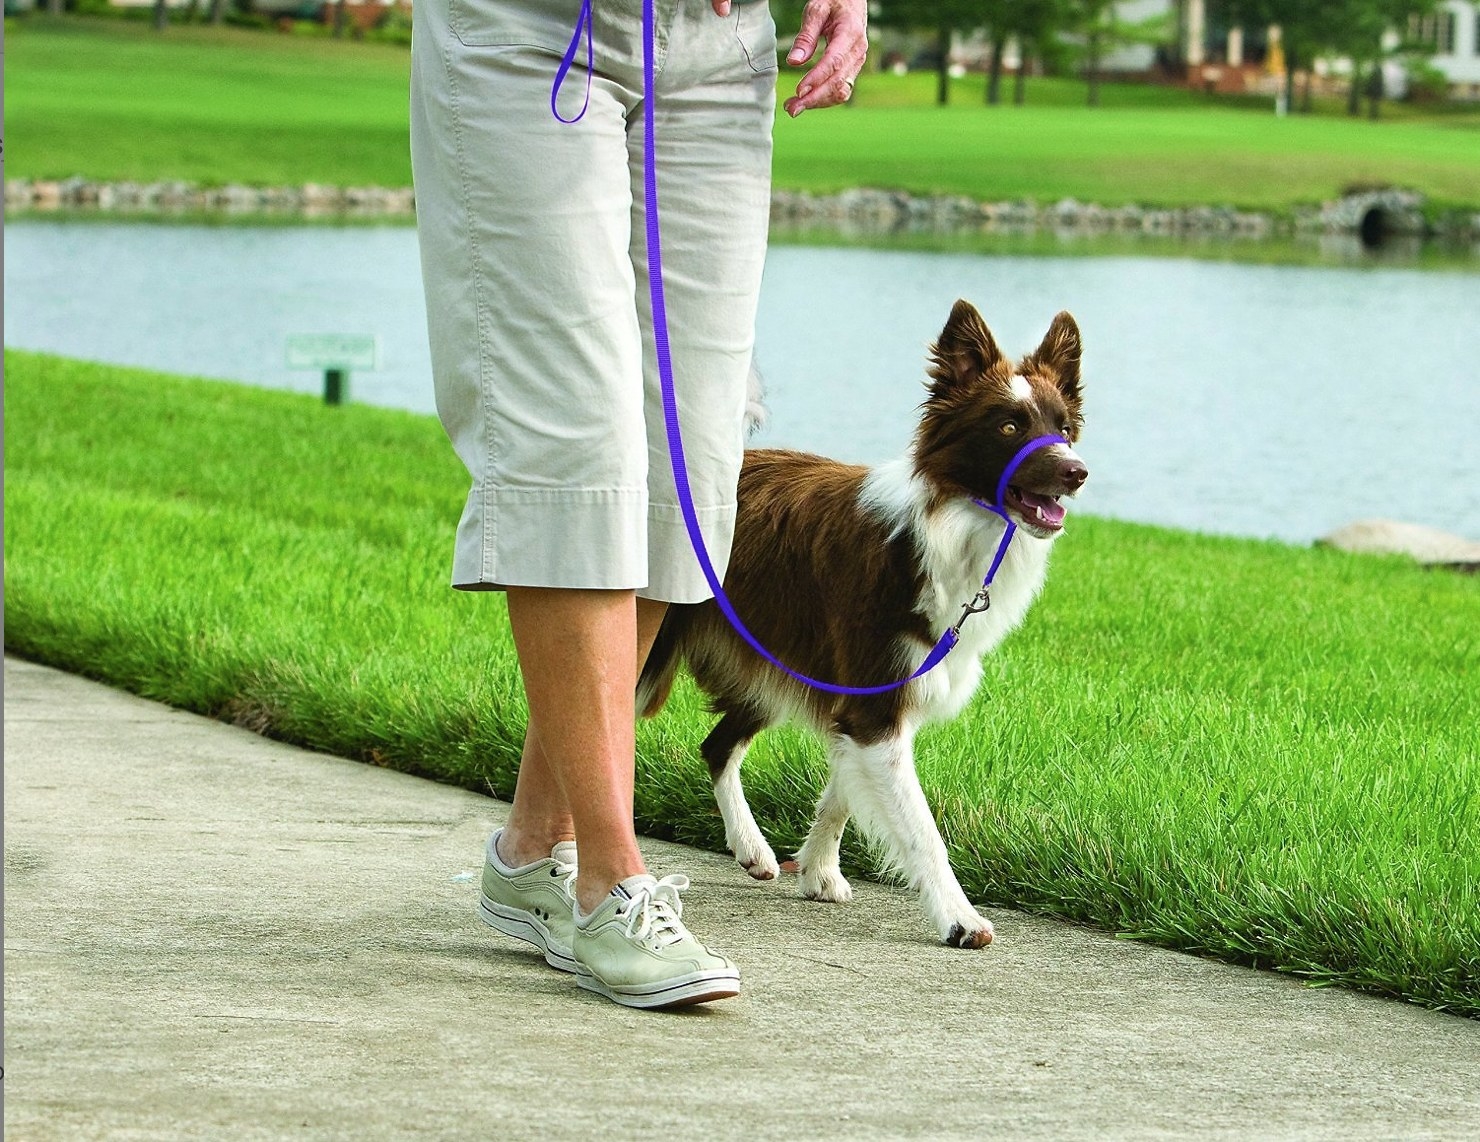 A medium brown and white dog with purple headcollar in park